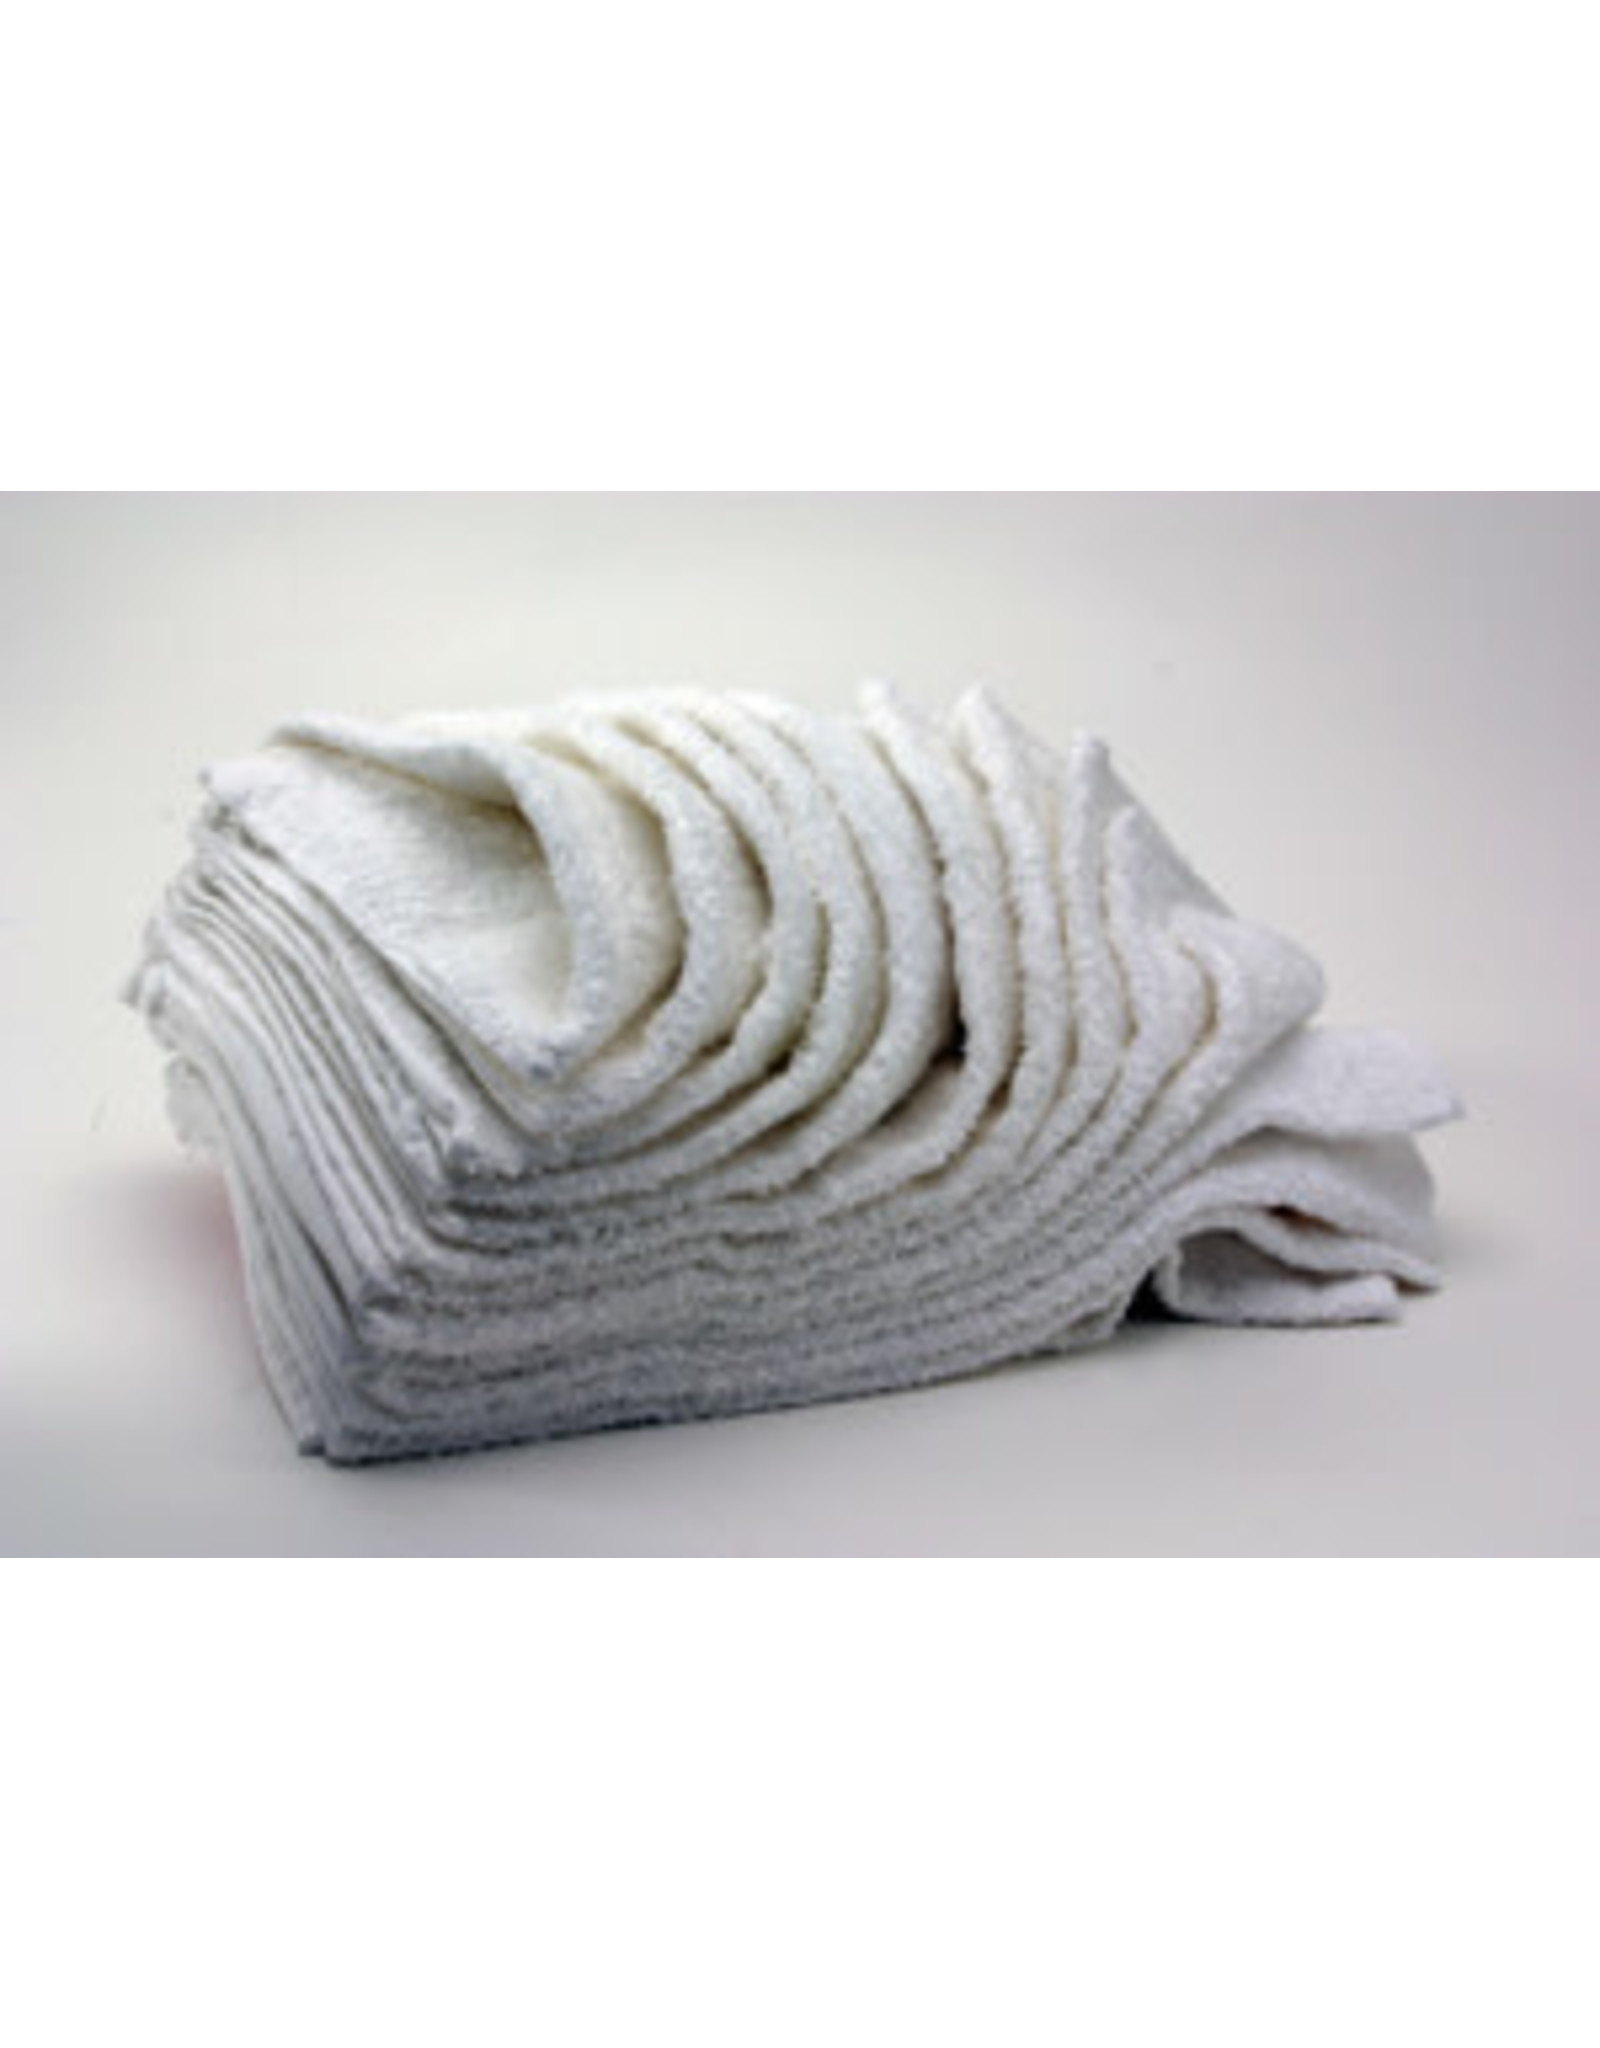 Sargent Steam Cleaners TERRY TOWELS 24-WHITE